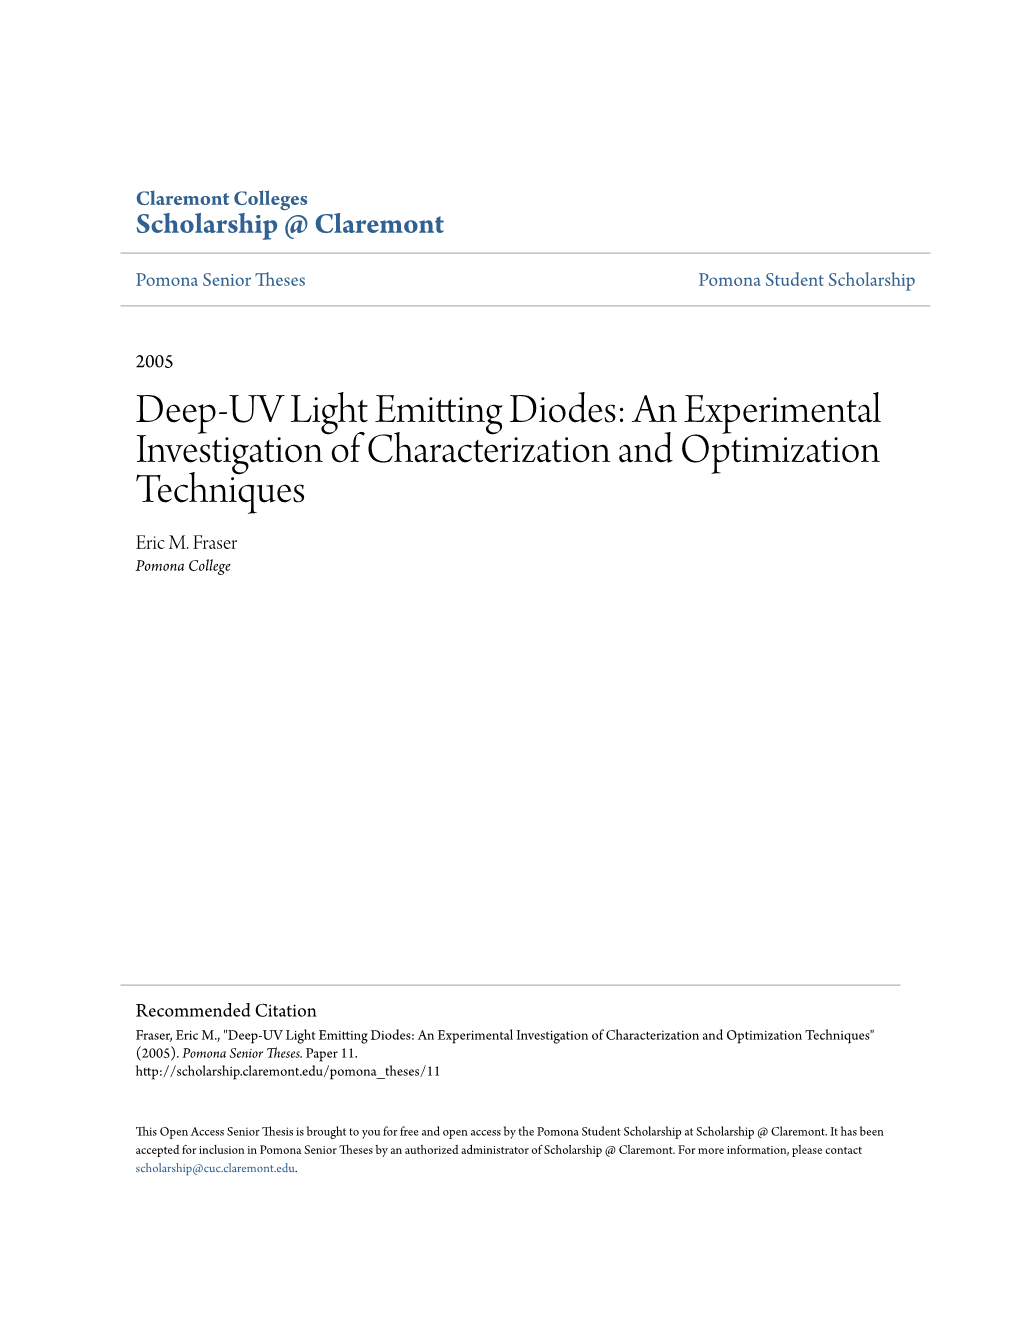 Deep-UV Light Emitting Diodes: an Experimental Investigation of Characterization and Optimization Techniques Eric M